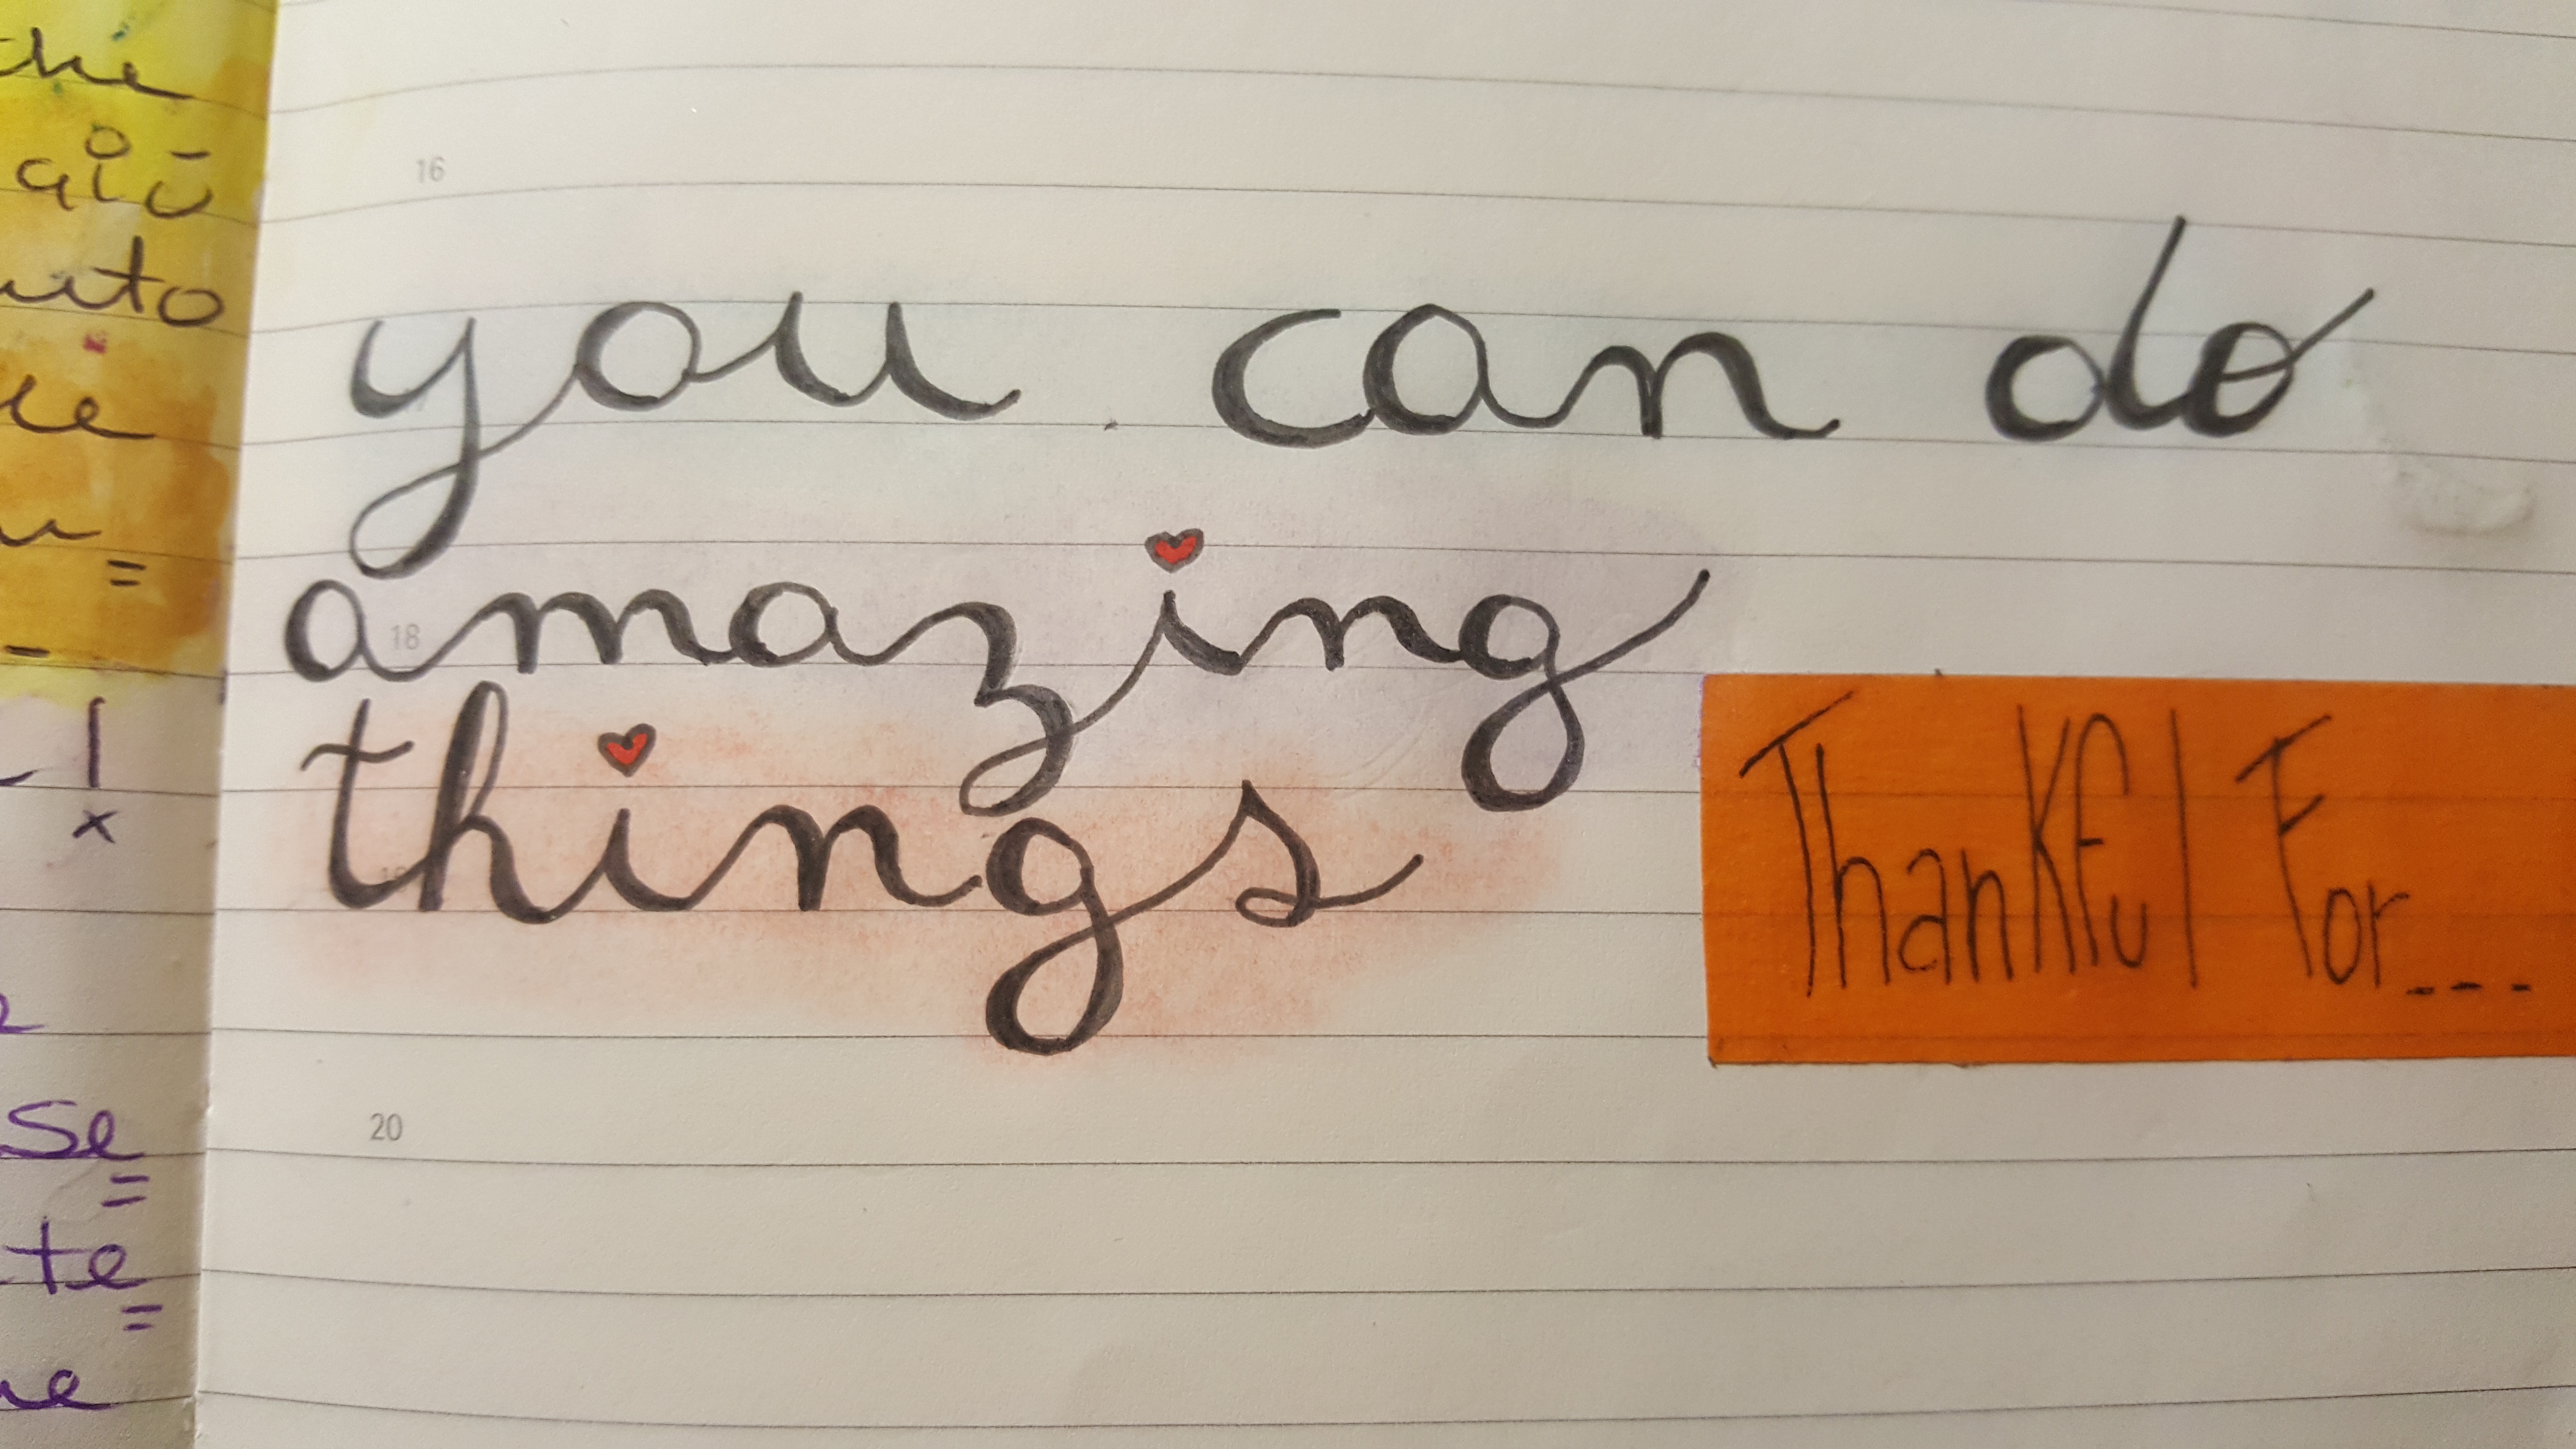 YOU CAN DO AMAZING THINGS!